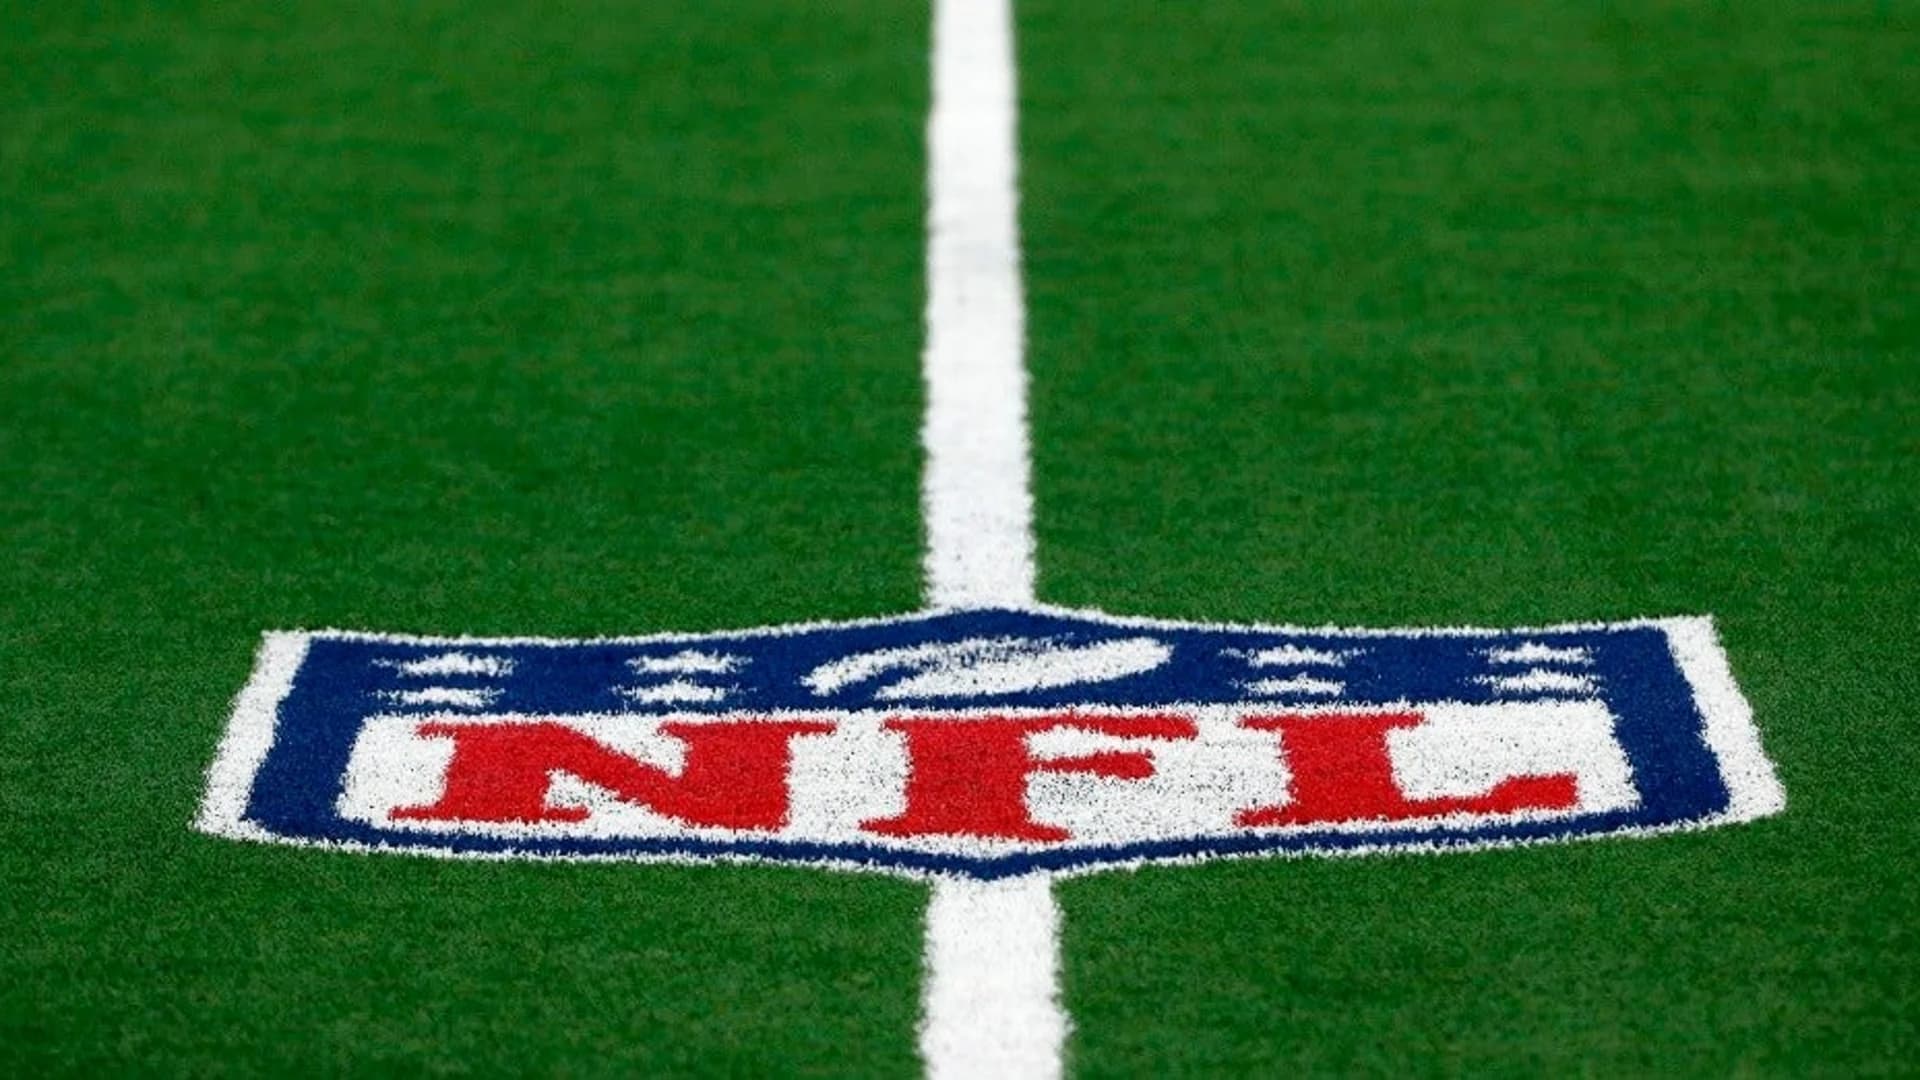 Jets, Giants, Pats, Eagles release full 2020 schedules